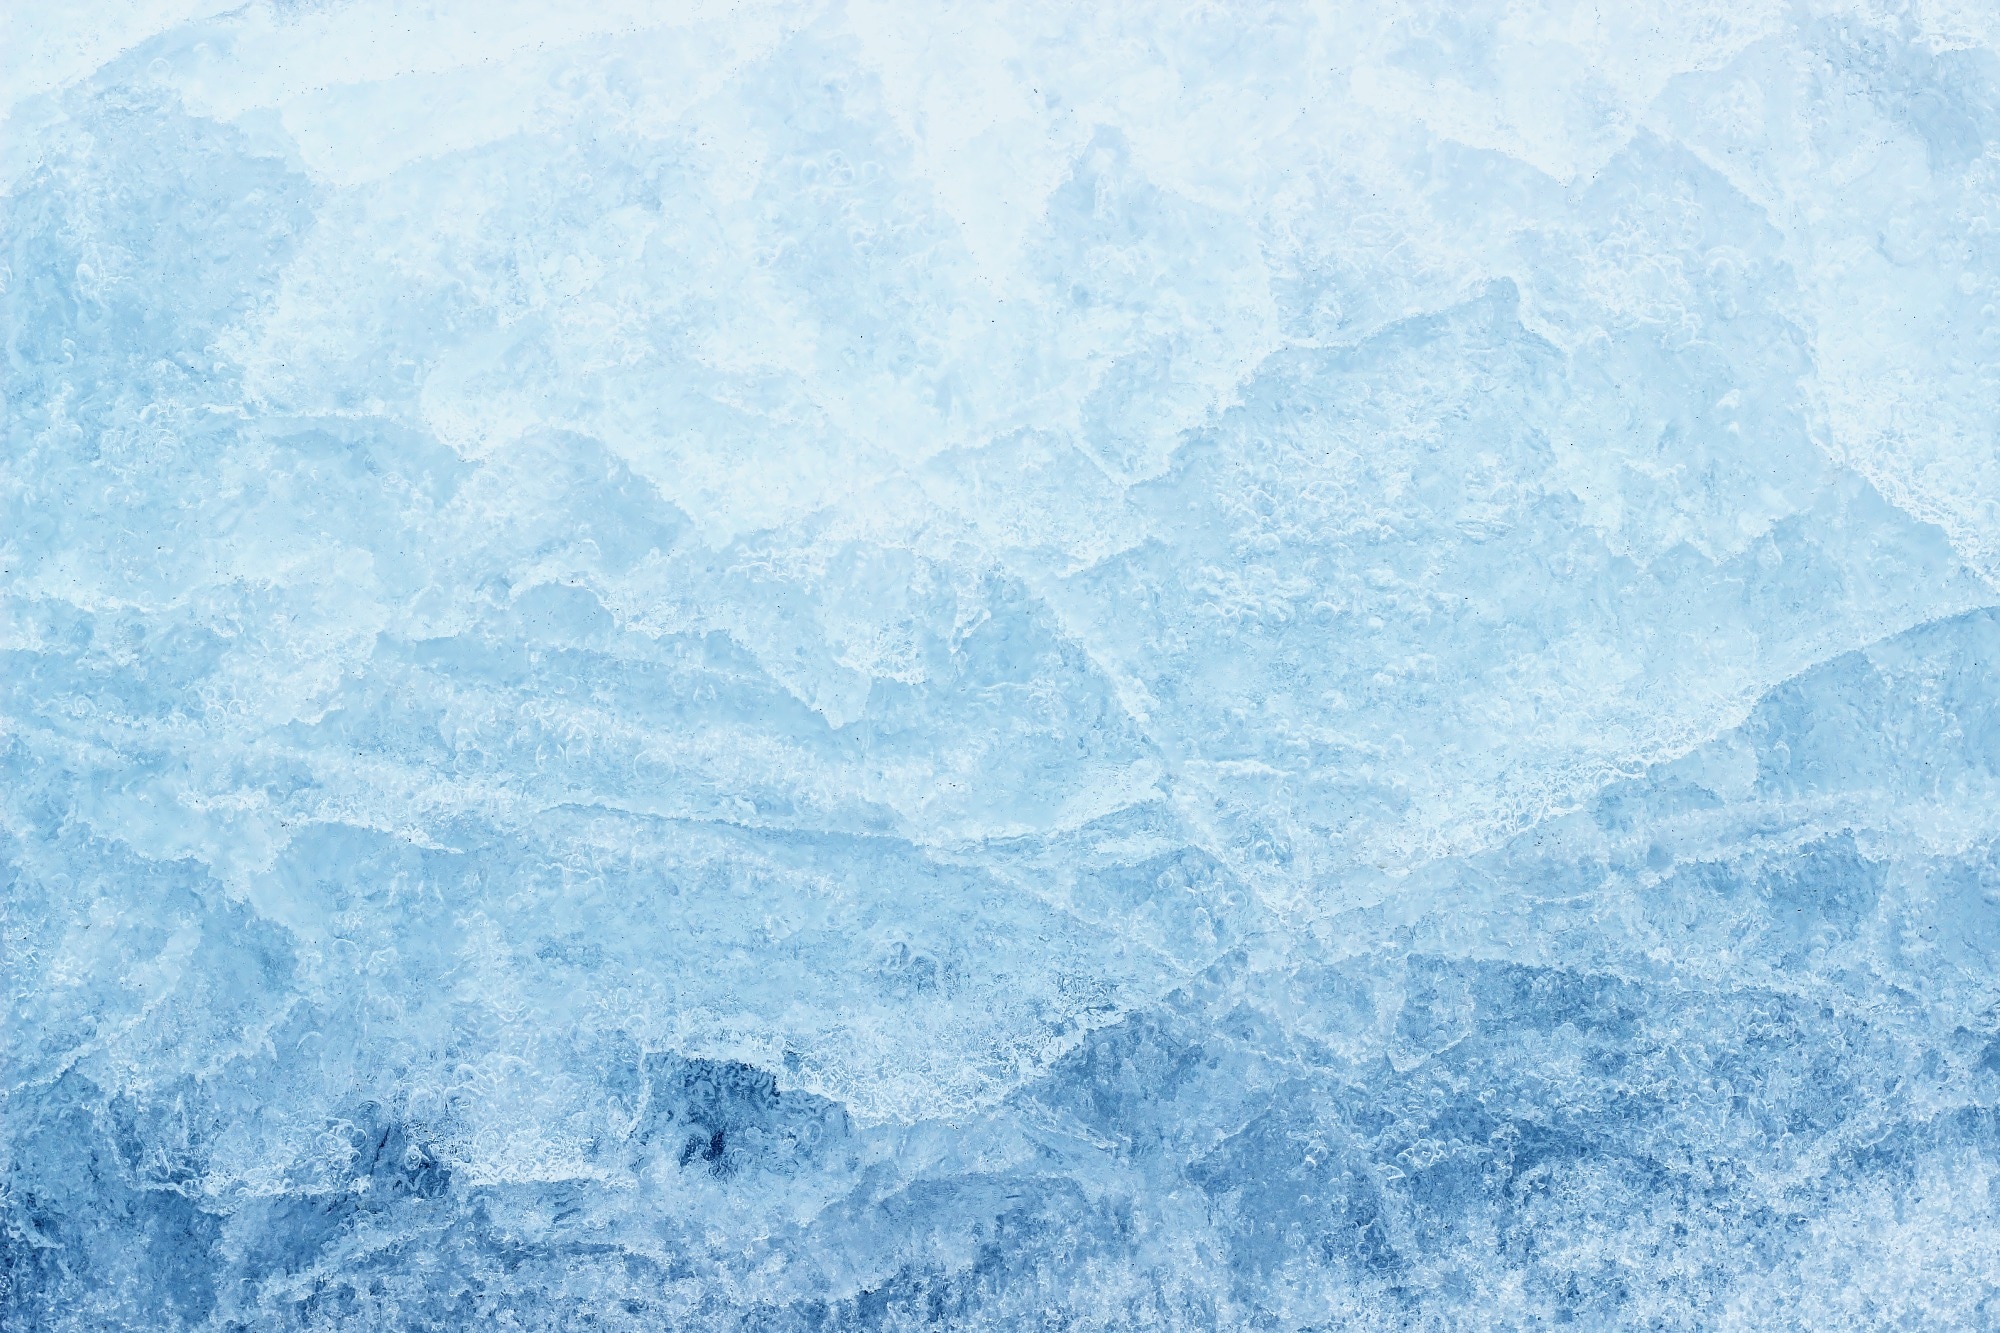 Sprayable Ice-Shedding Material Combats Icing Dangers